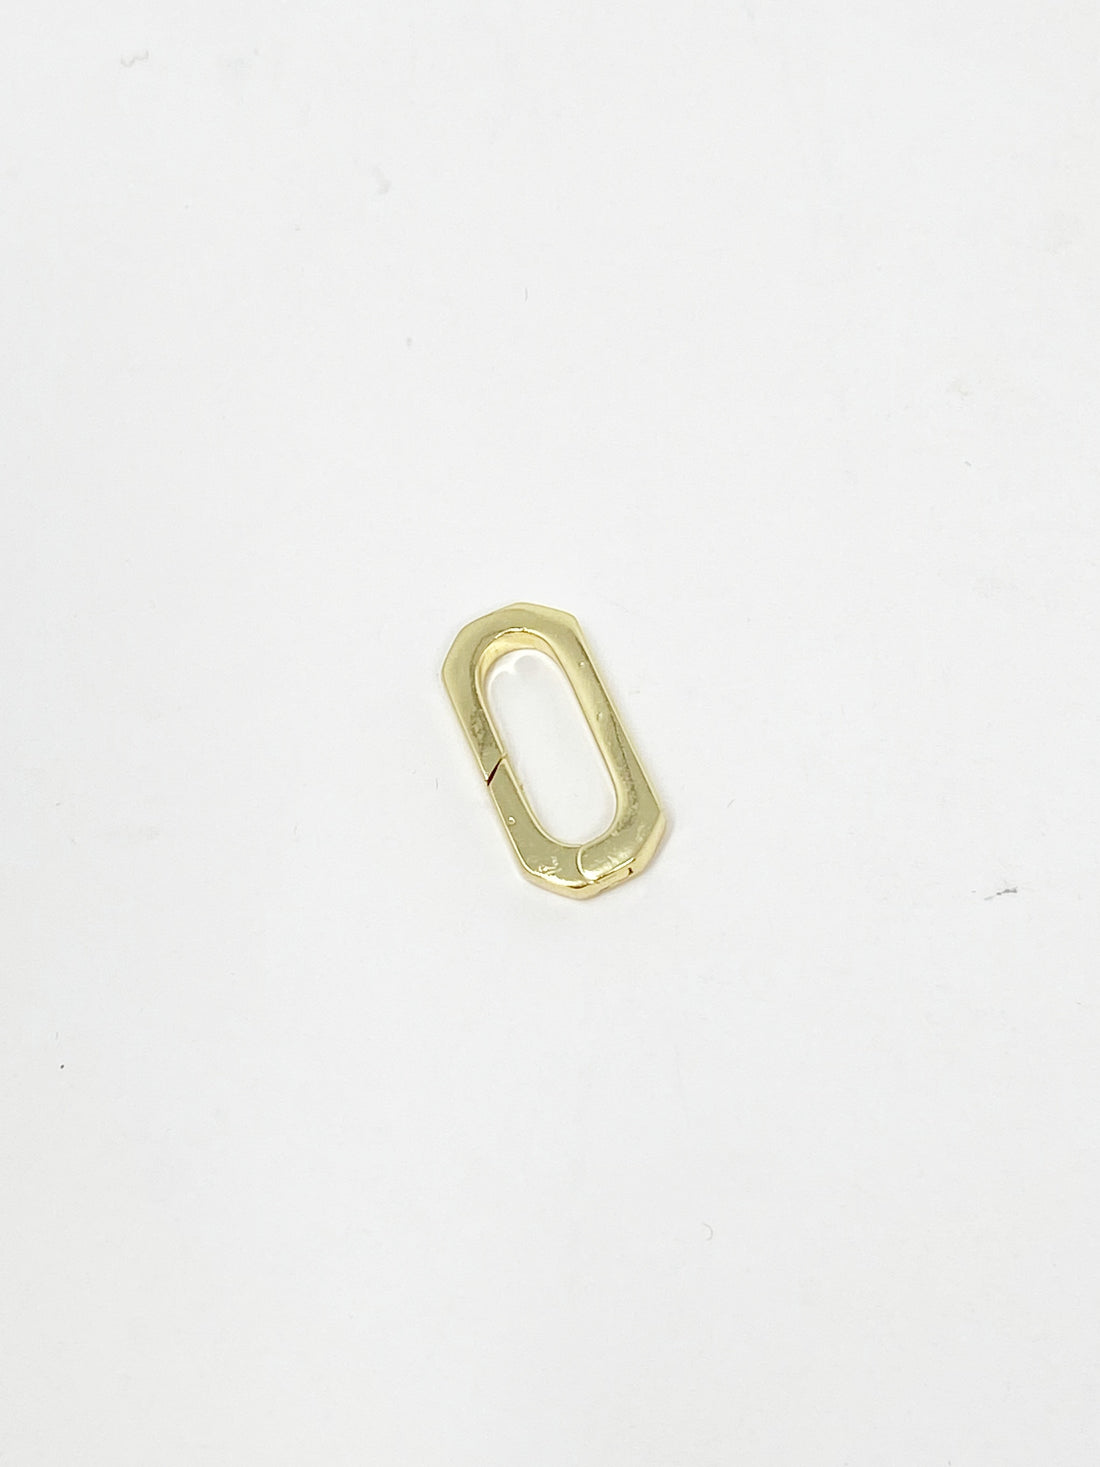 Charming Small Rectangle Spring Clasp in Gold